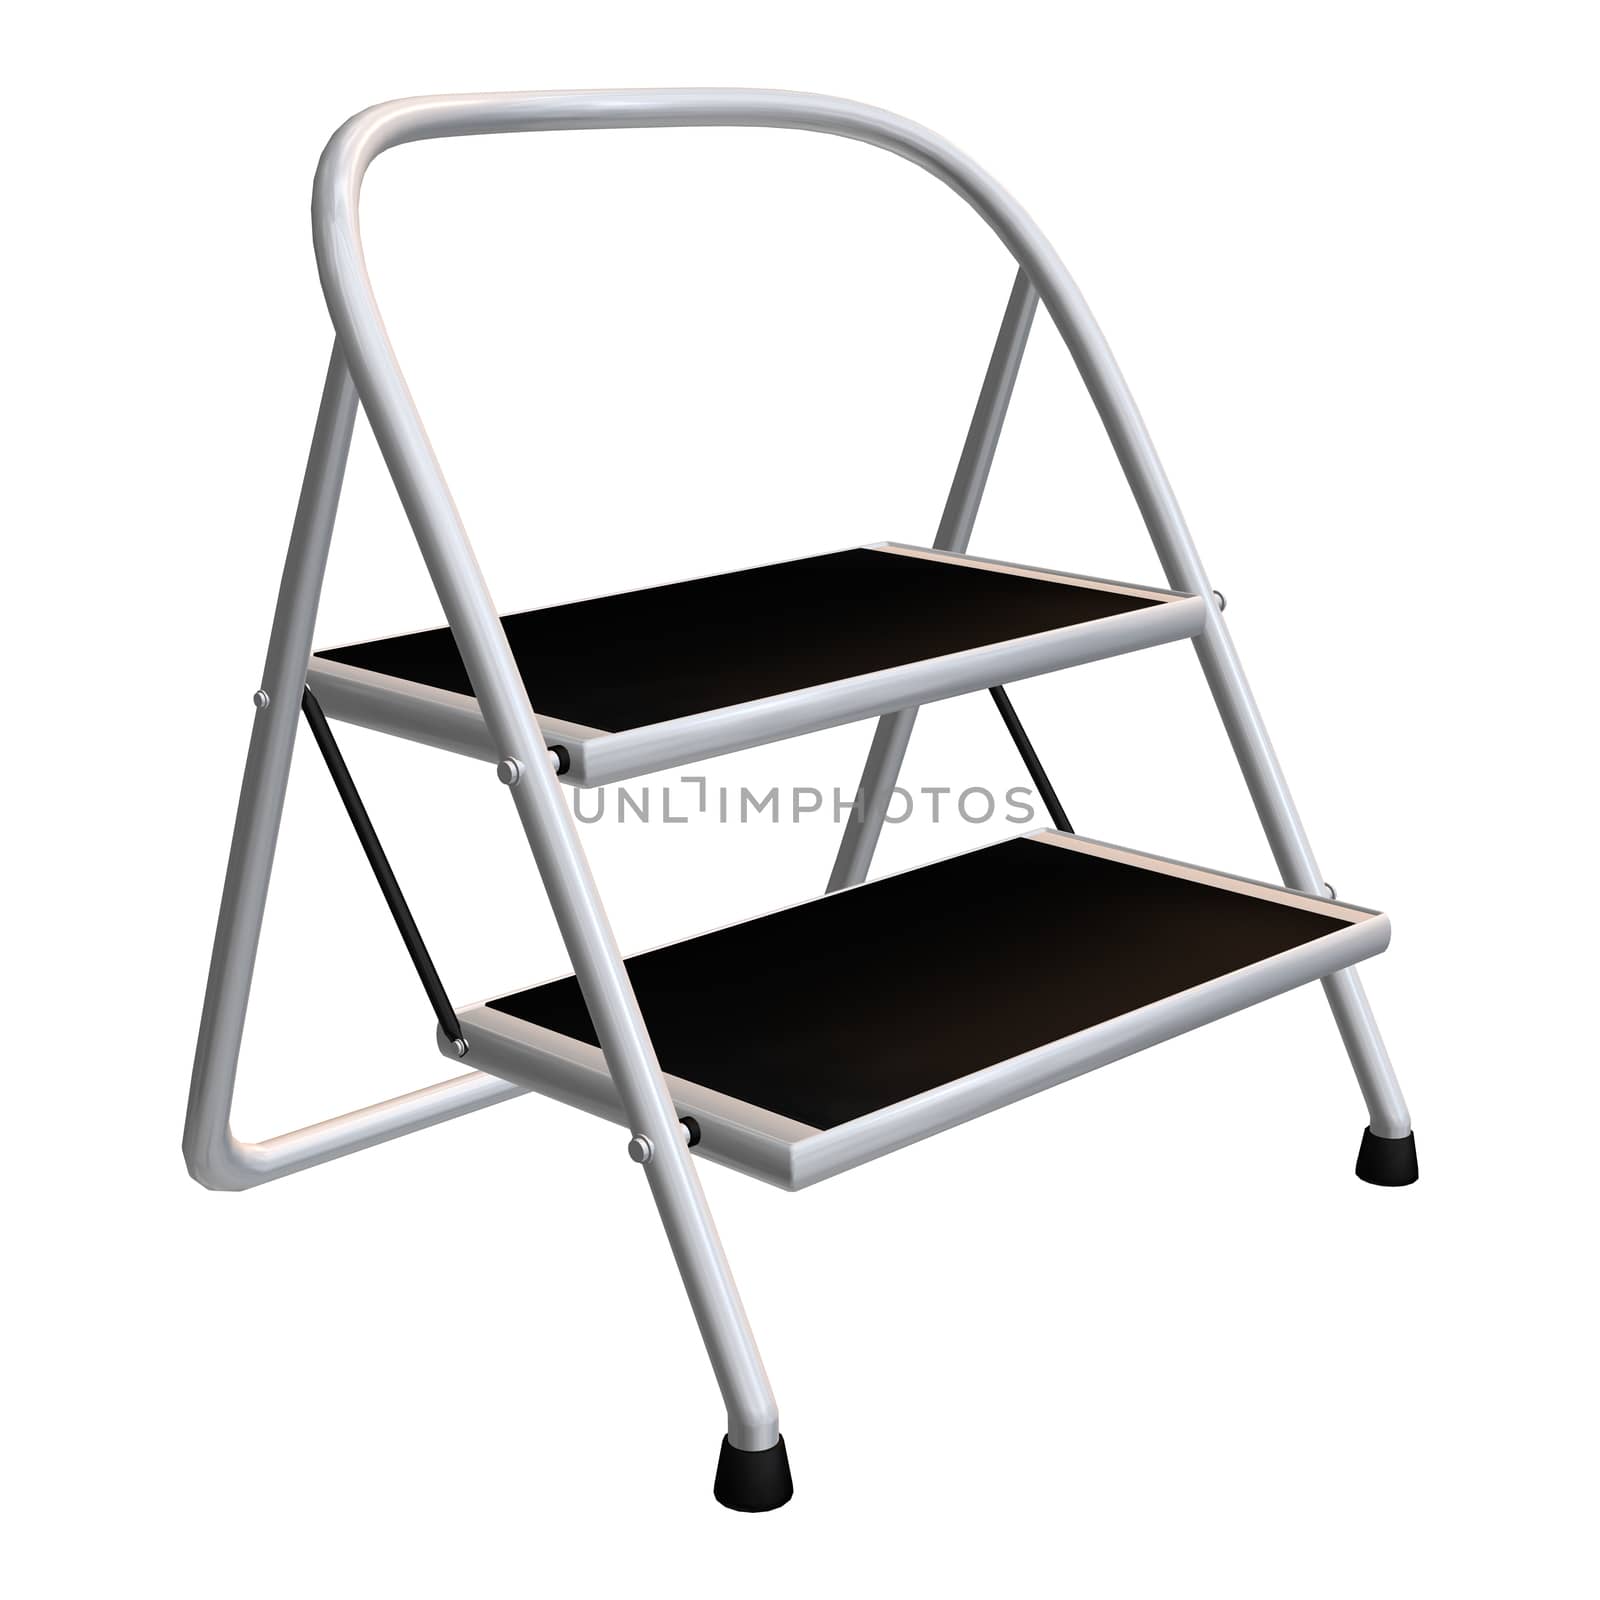 3D digital render of a step ladder isolated on white background